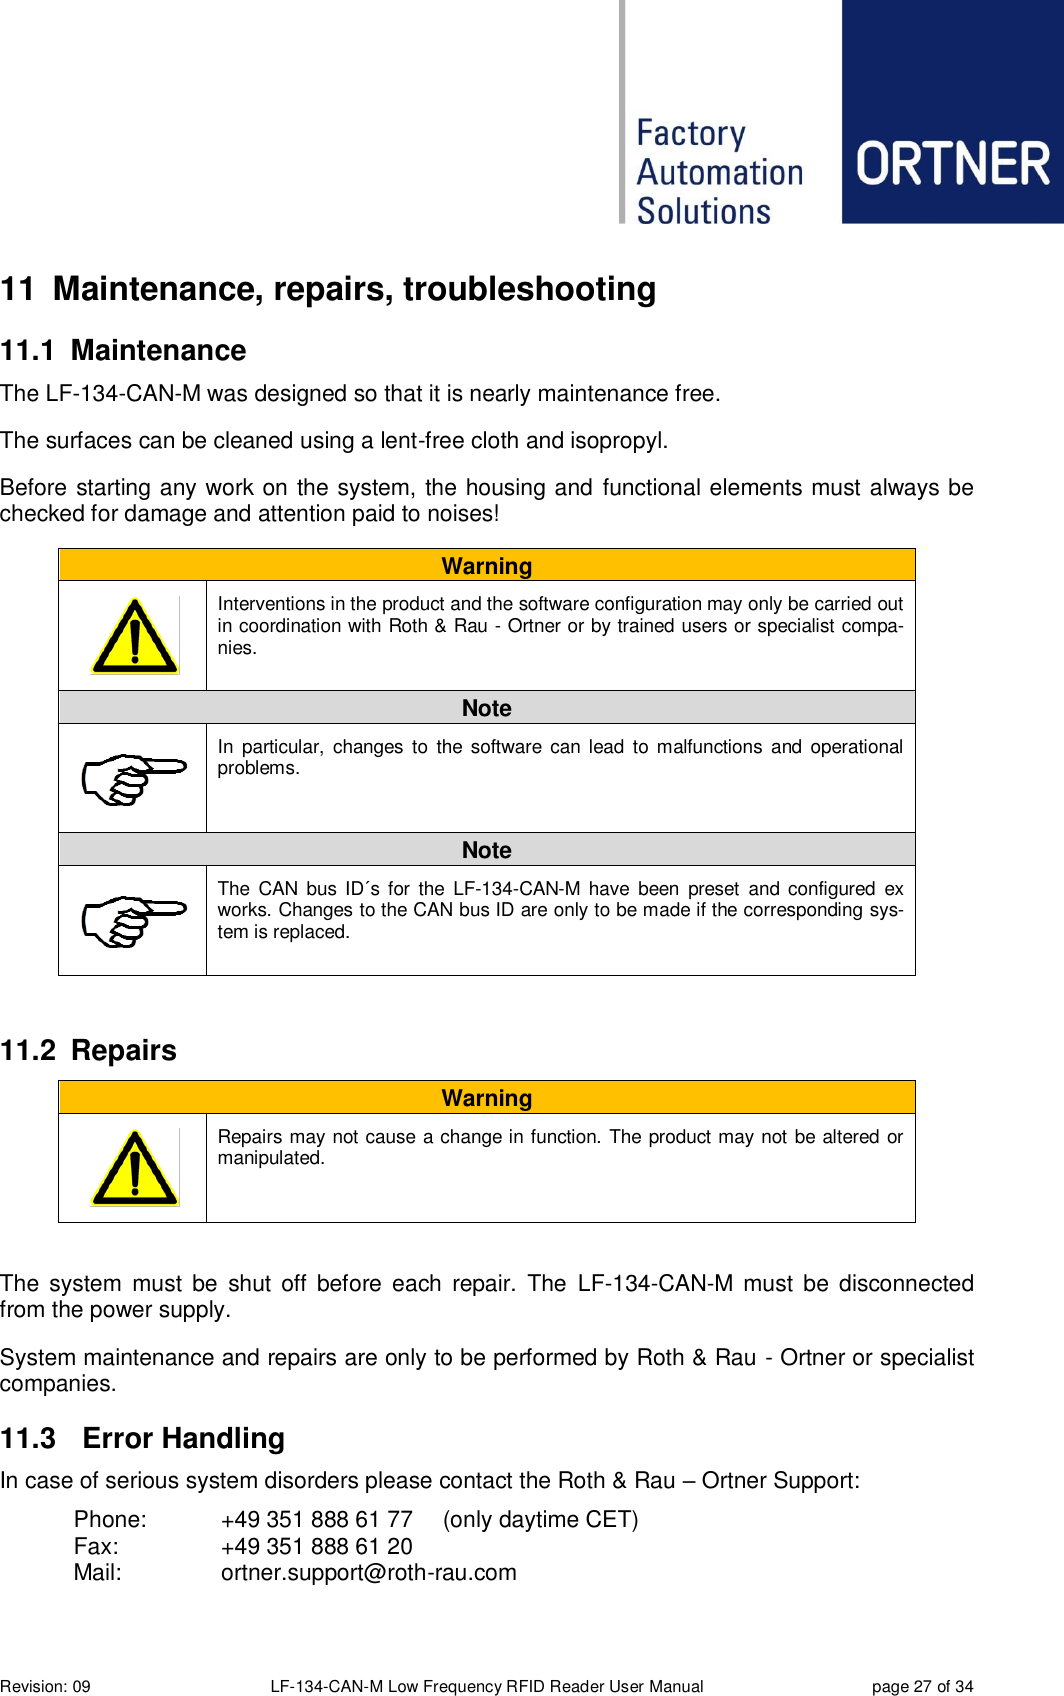  Revision: 09 LF-134-CAN-M Low Frequency RFID Reader User Manual  page 27 of 34 11  Maintenance, repairs, troubleshooting 11.1  Maintenance The LF-134-CAN-M was designed so that it is nearly maintenance free.   The surfaces can be cleaned using a lent-free cloth and isopropyl. Before starting any work on the system, the housing and functional elements must always be checked for damage and attention paid to noises! Warning       Interventions in the product and the software configuration may only be carried out in coordination with Roth &amp; Rau - Ortner or by trained users or specialist compa-nies. Note  In  particular,  changes  to  the  software  can lead  to  malfunctions  and operational problems. Note  The  CAN  bus  ID´s  for  the  LF-134-CAN-M  have  been  preset  and configured  ex works. Changes to the CAN bus ID are only to be made if the corresponding sys-tem is replaced.   11.2  Repairs Warning       Repairs may not cause a change in function. The product may not be altered or manipulated.  The  system  must  be  shut  off  before  each  repair.  The  LF-134-CAN-M  must  be  disconnected from the power supply.  System maintenance and repairs are only to be performed by Roth &amp; Rau - Ortner or specialist companies. 11.3  Error Handling In case of serious system disorders please contact the Roth &amp; Rau – Ortner Support:   Phone:   +49 351 888 61 77  (only daytime CET)   Fax:    +49 351 888 61 20   Mail:    ortner.support@roth-rau.com 